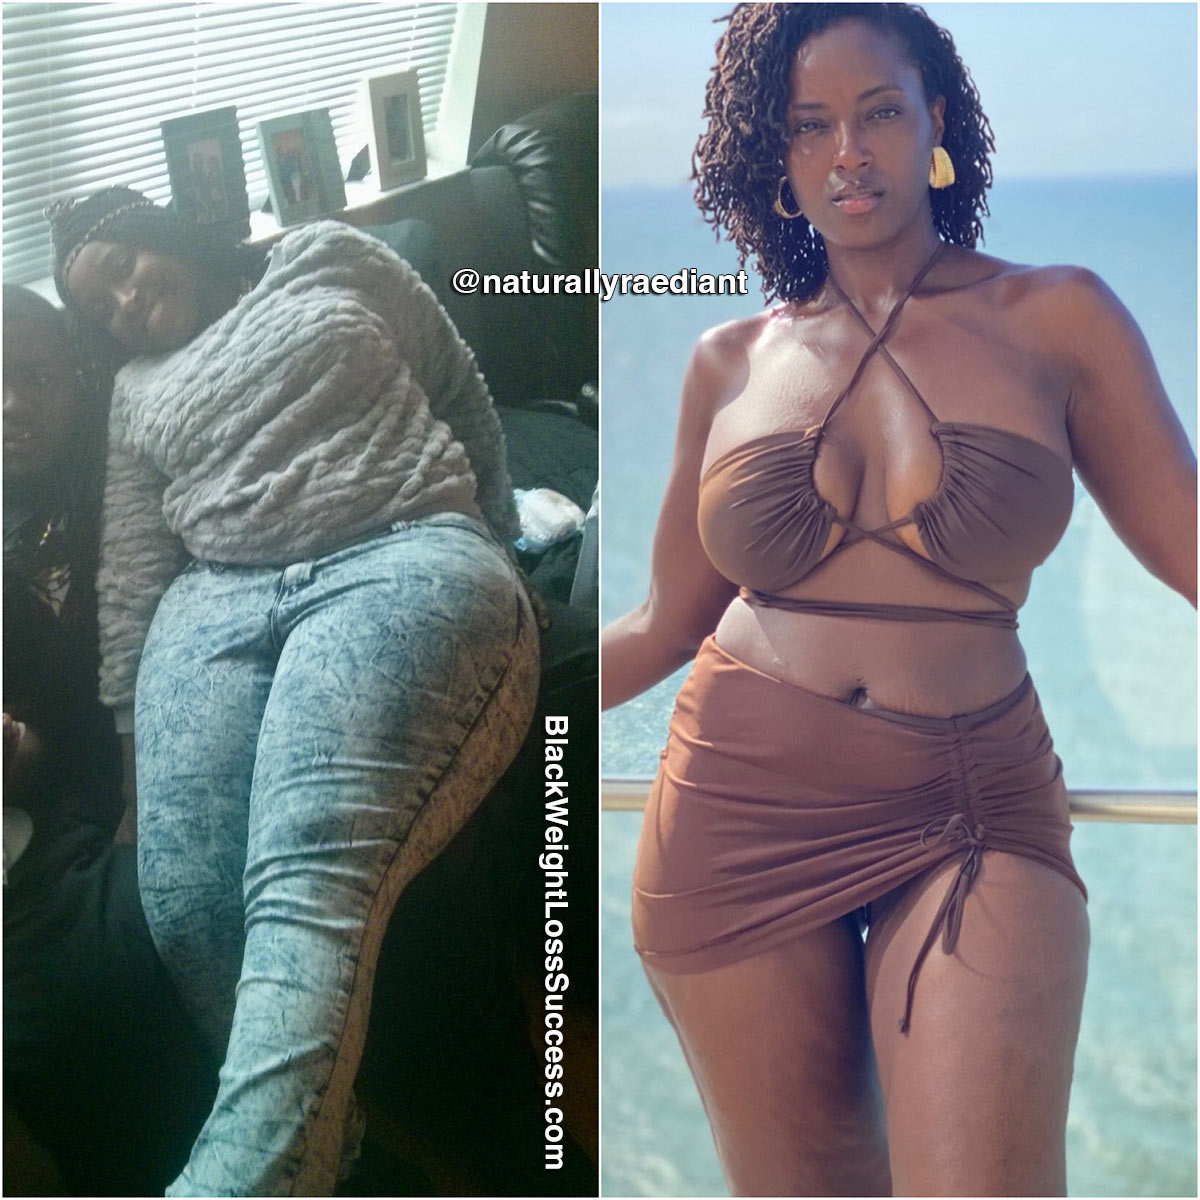 Radiance lost 95 pounds